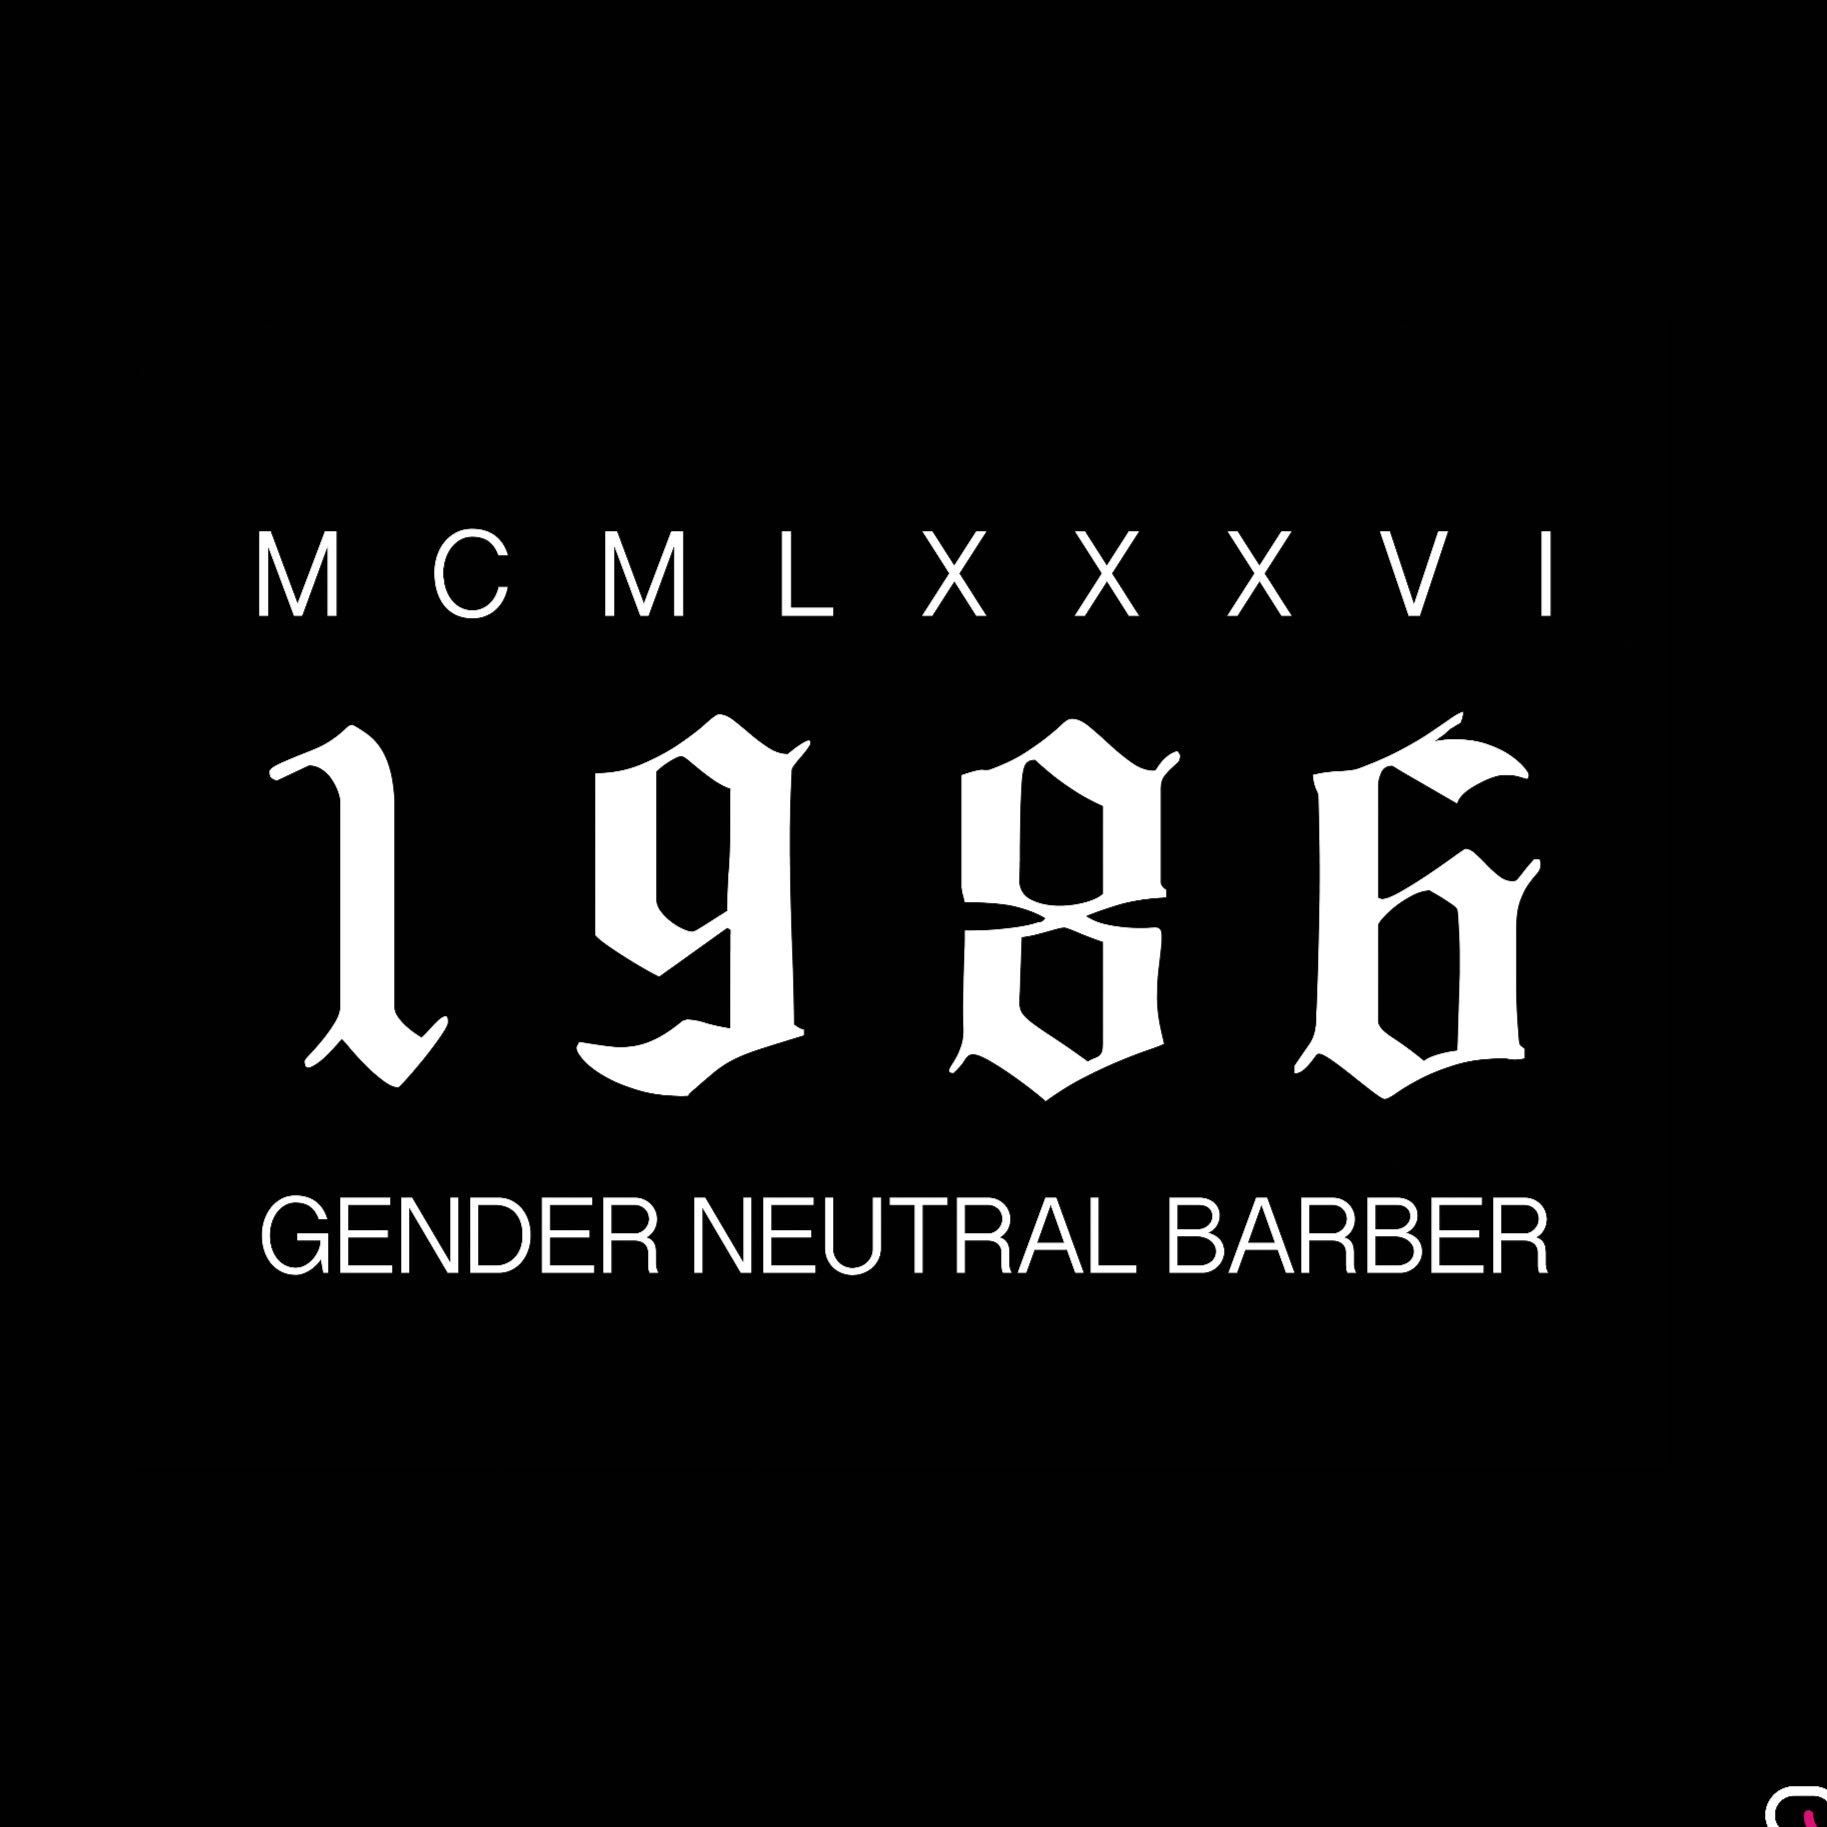 1986 Barber, The Carousel, 25 Hockley, NG1 1FH, Nottingham